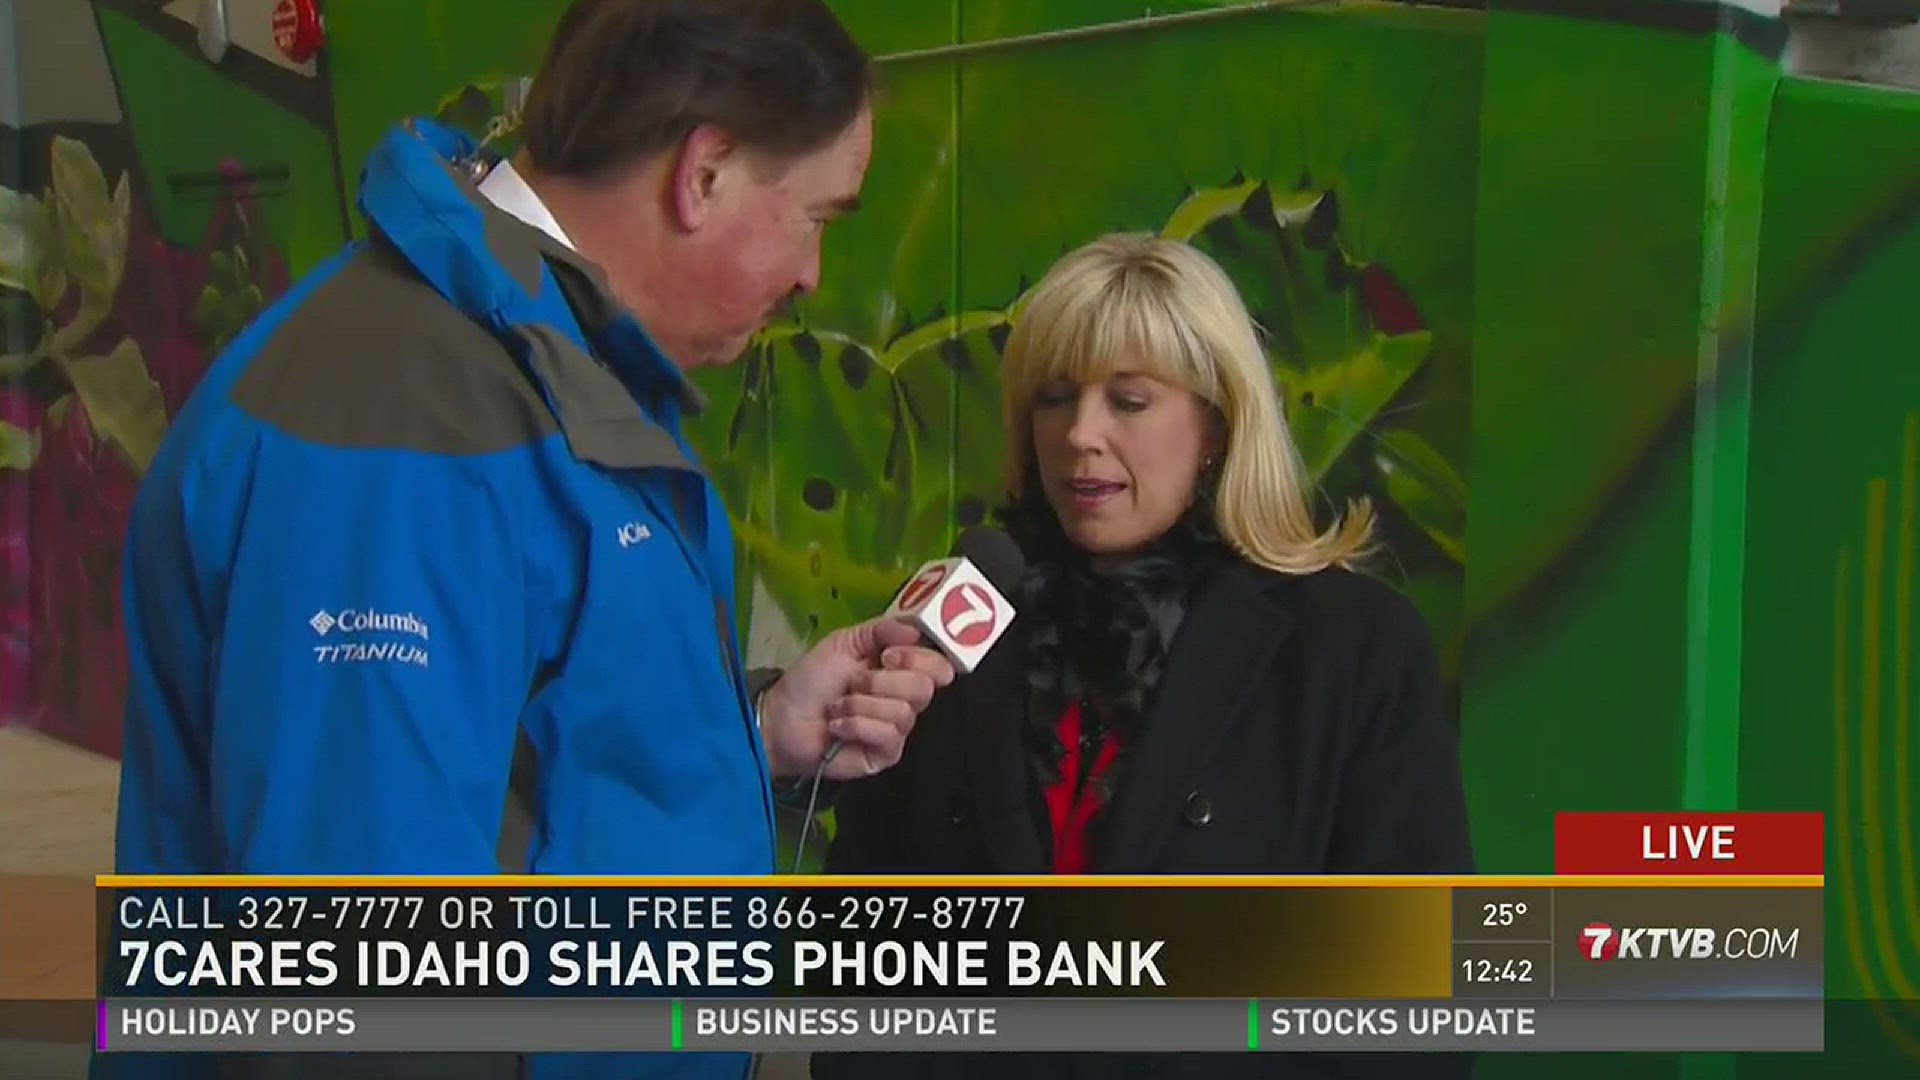 Toni Nielsen talks about why Zions Bank, a Company that Cares, wants to "take it up a notch" this year in regards to giving back to the community.